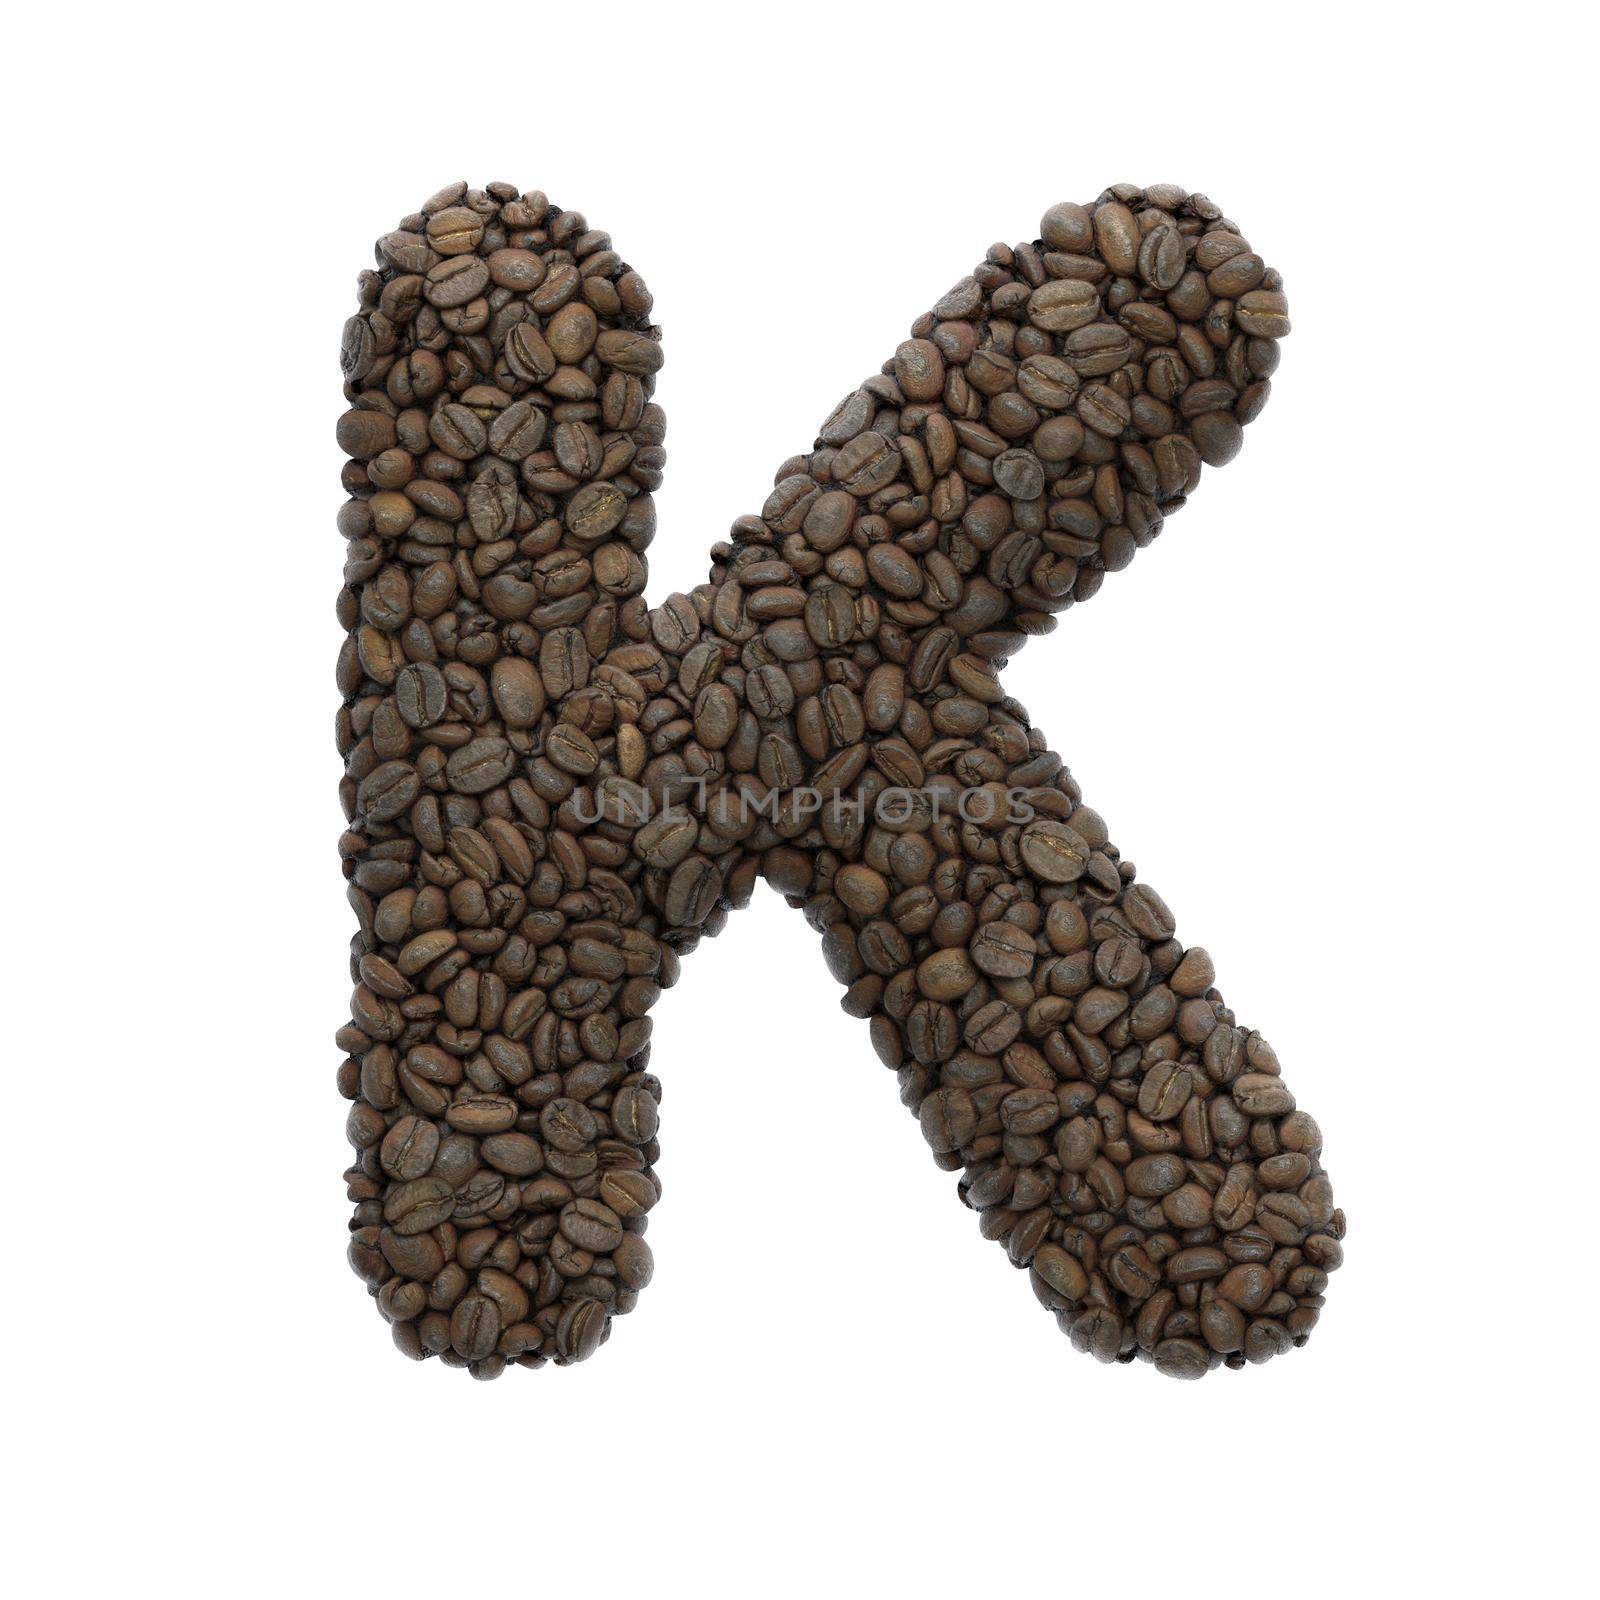 Coffee letter K - Large 3d roasted beans font isolated on white background. This alphabet is perfect for creative illustrations related but not limited to Coffee, energy, insomnia...